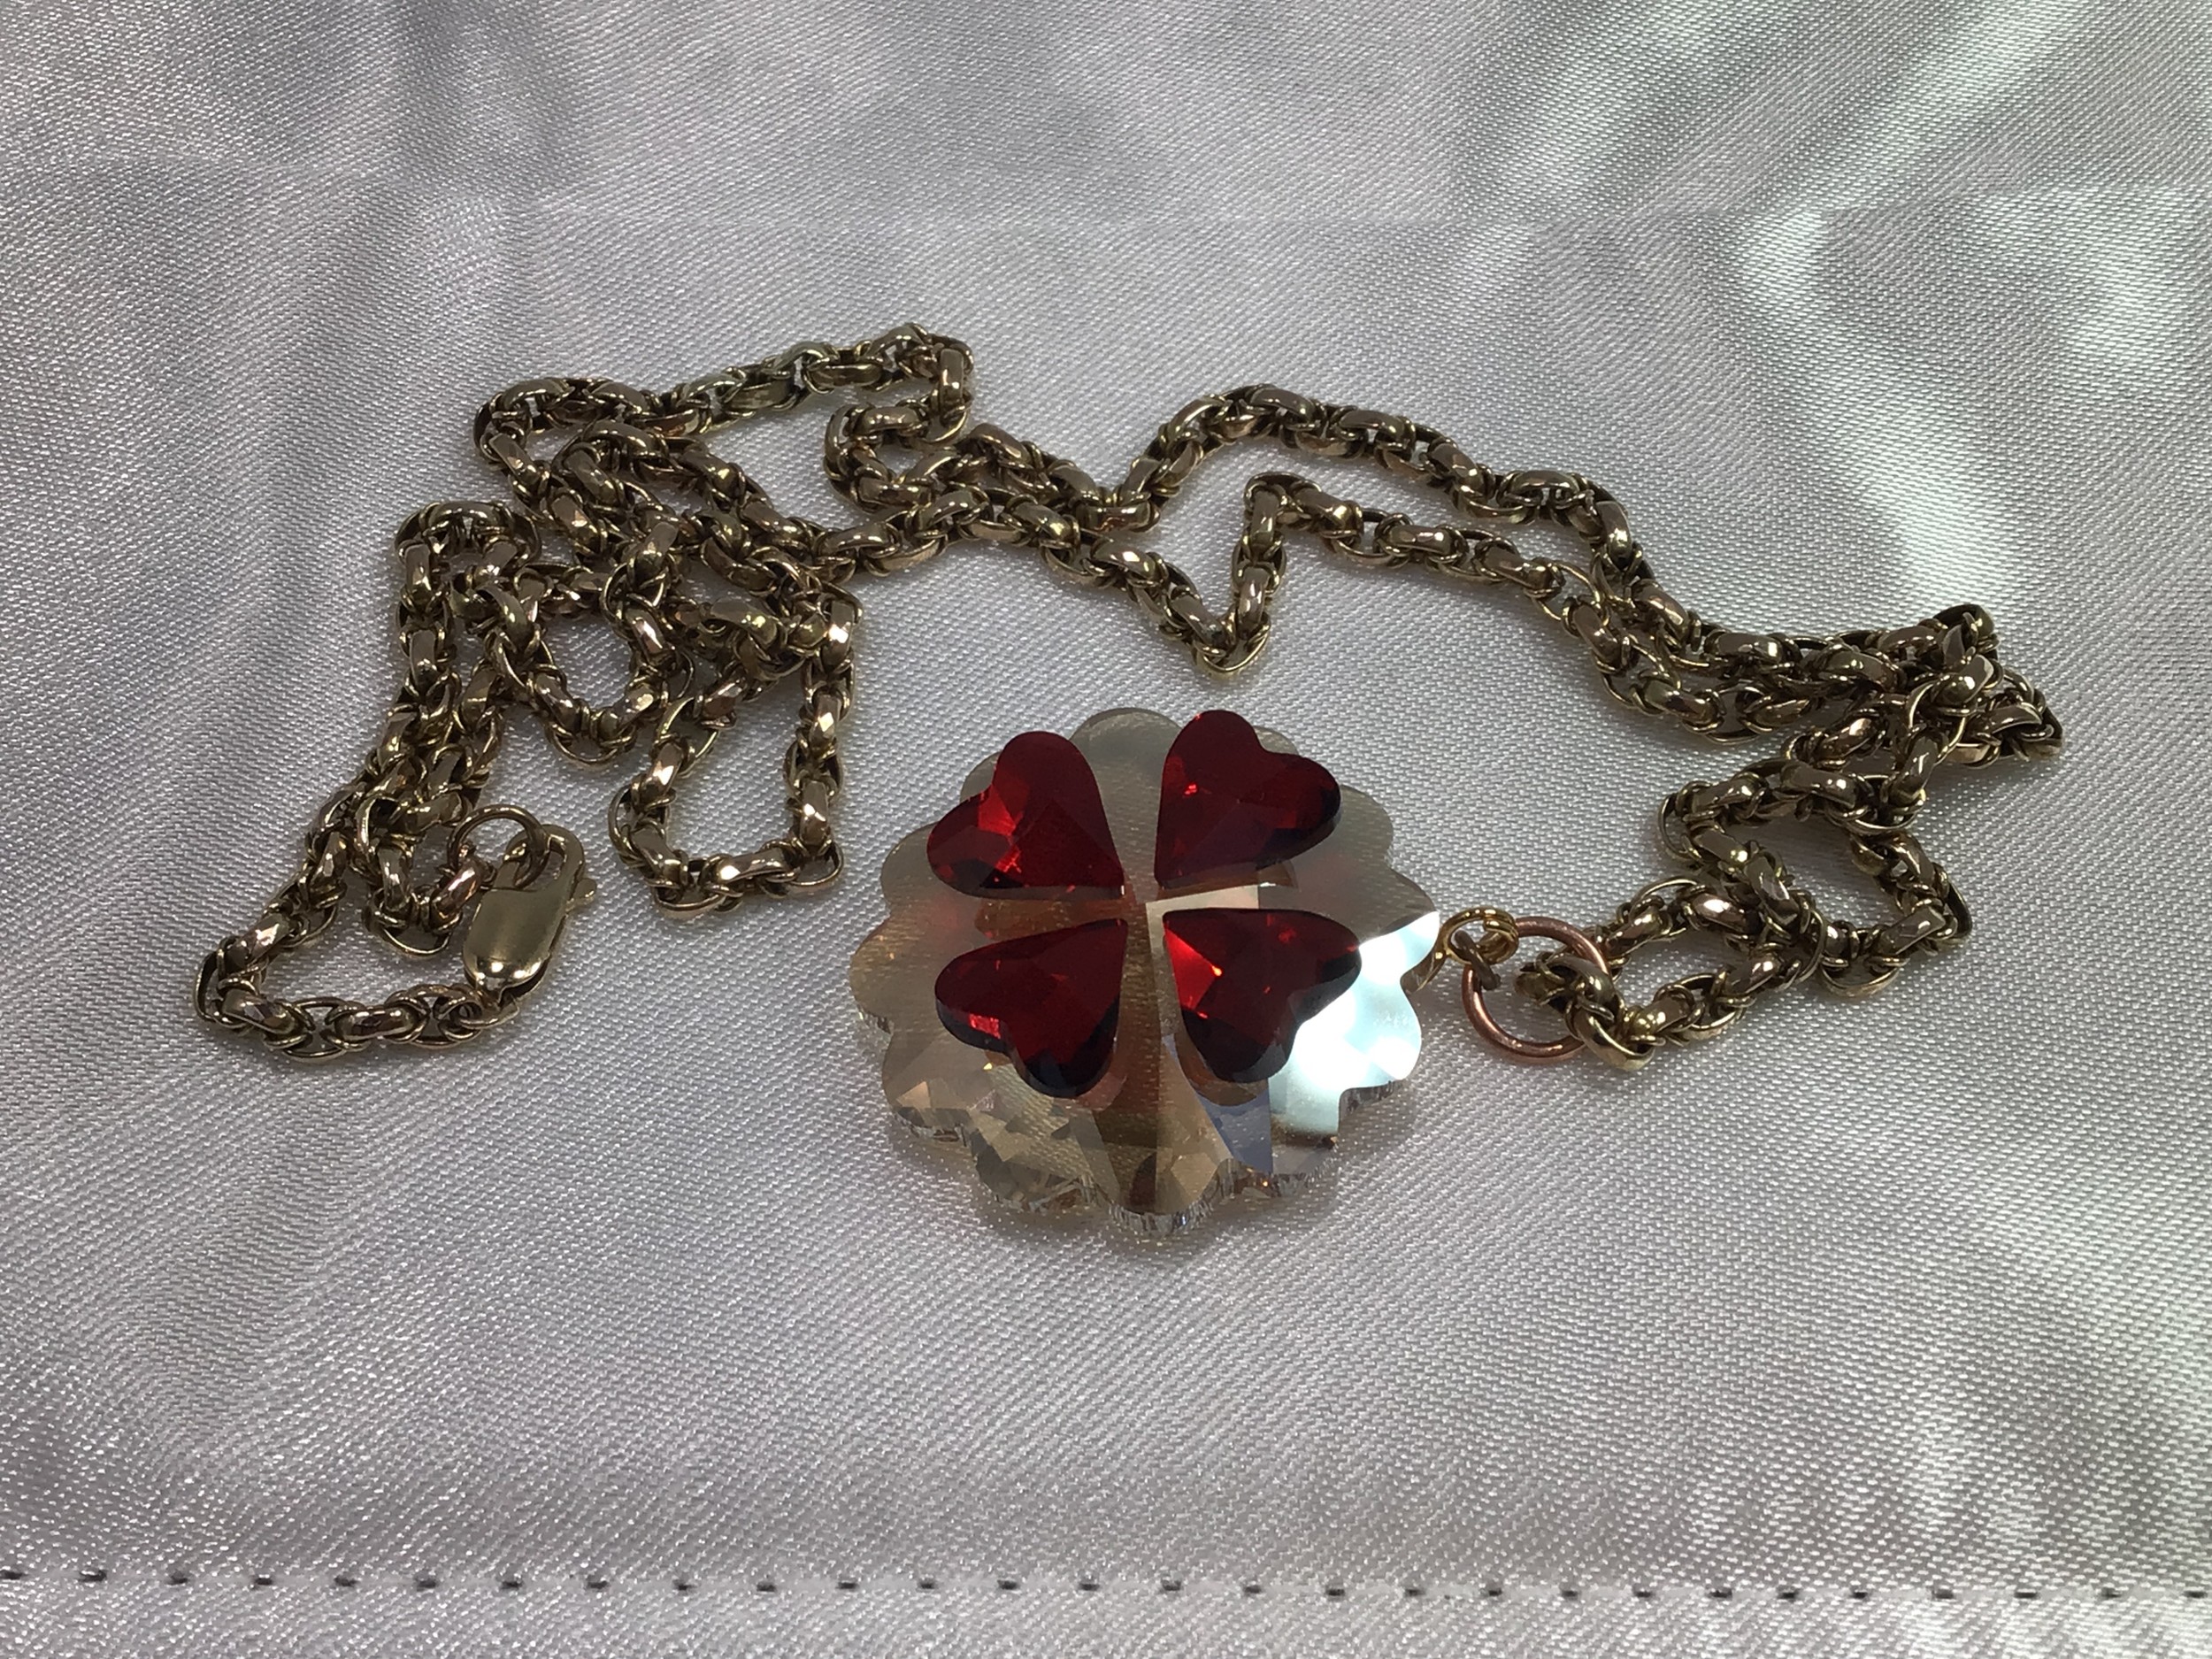 A 9ct gold belcher link chain with glass pendant with four red hearts formed as a stylised four leaf